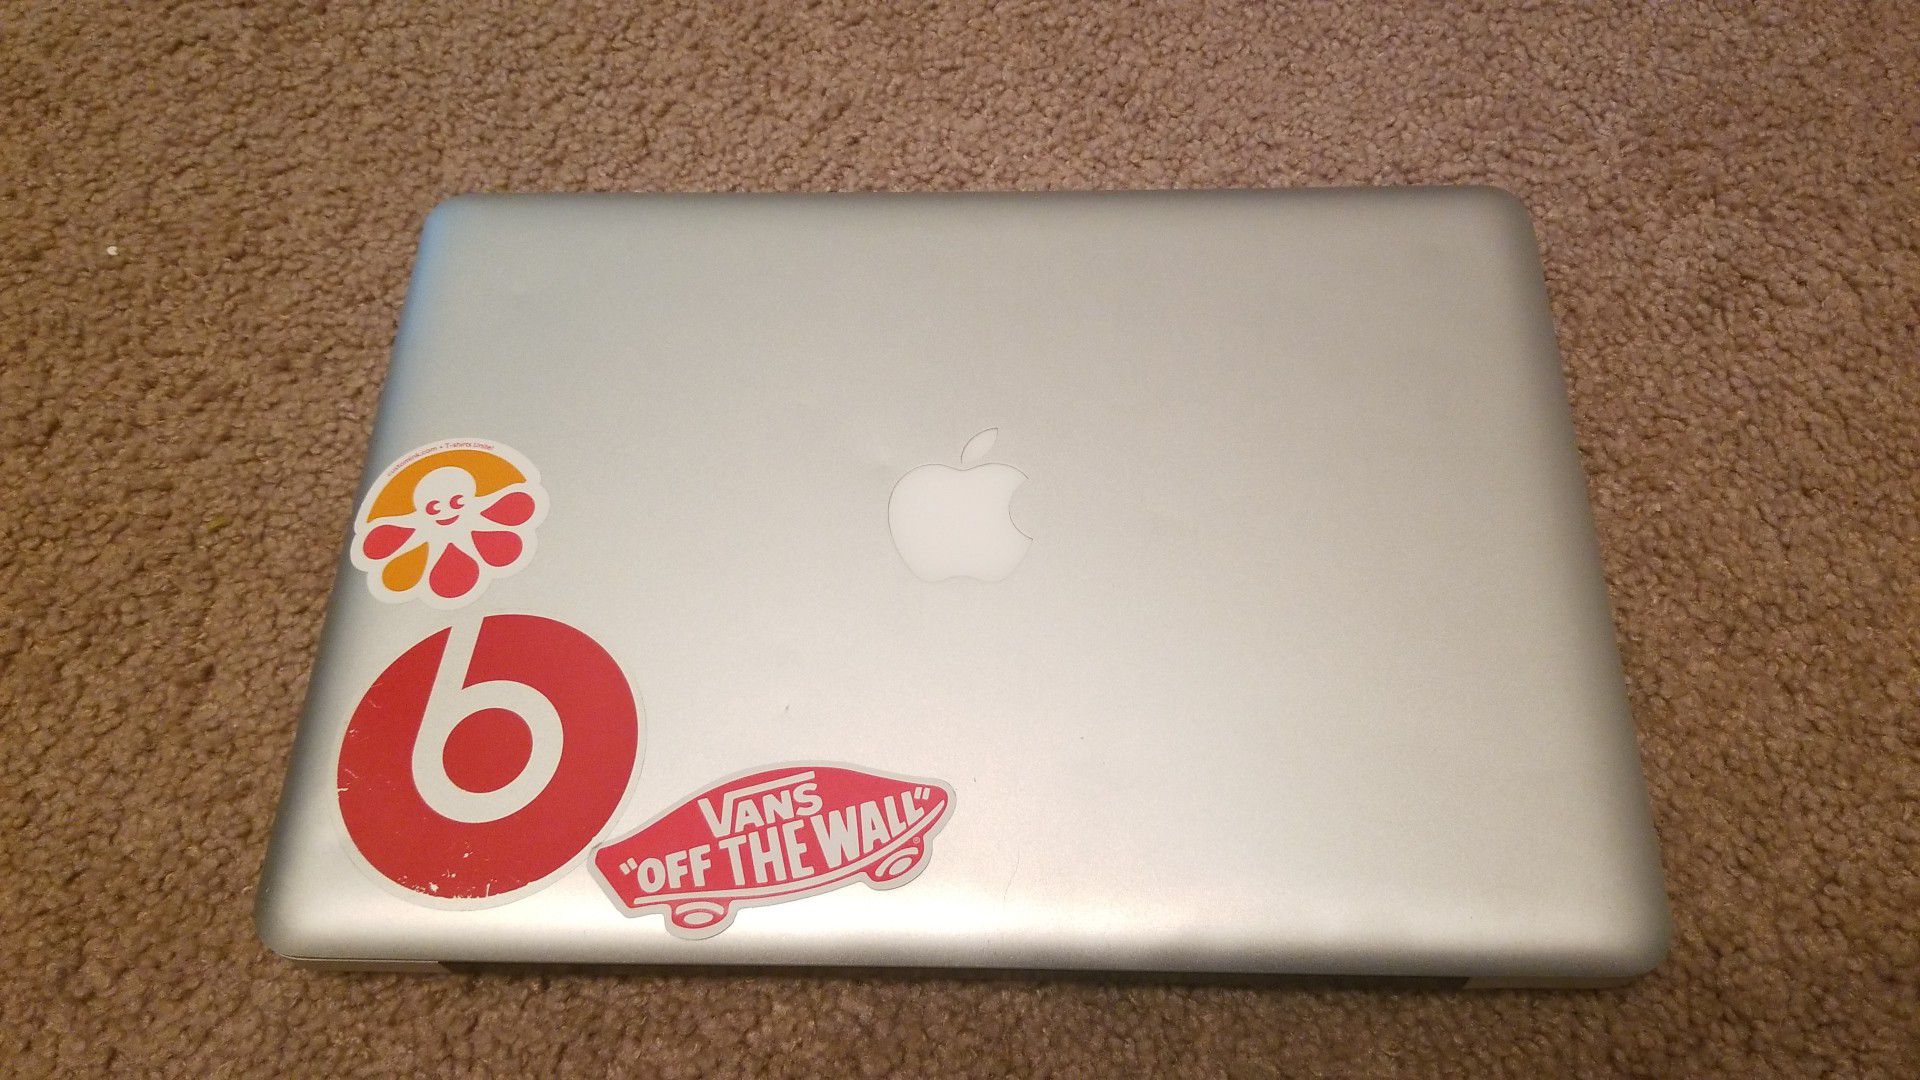 Macbook pro, used has one dent but in great condition, 2010, 13 inches. Has DVD room.